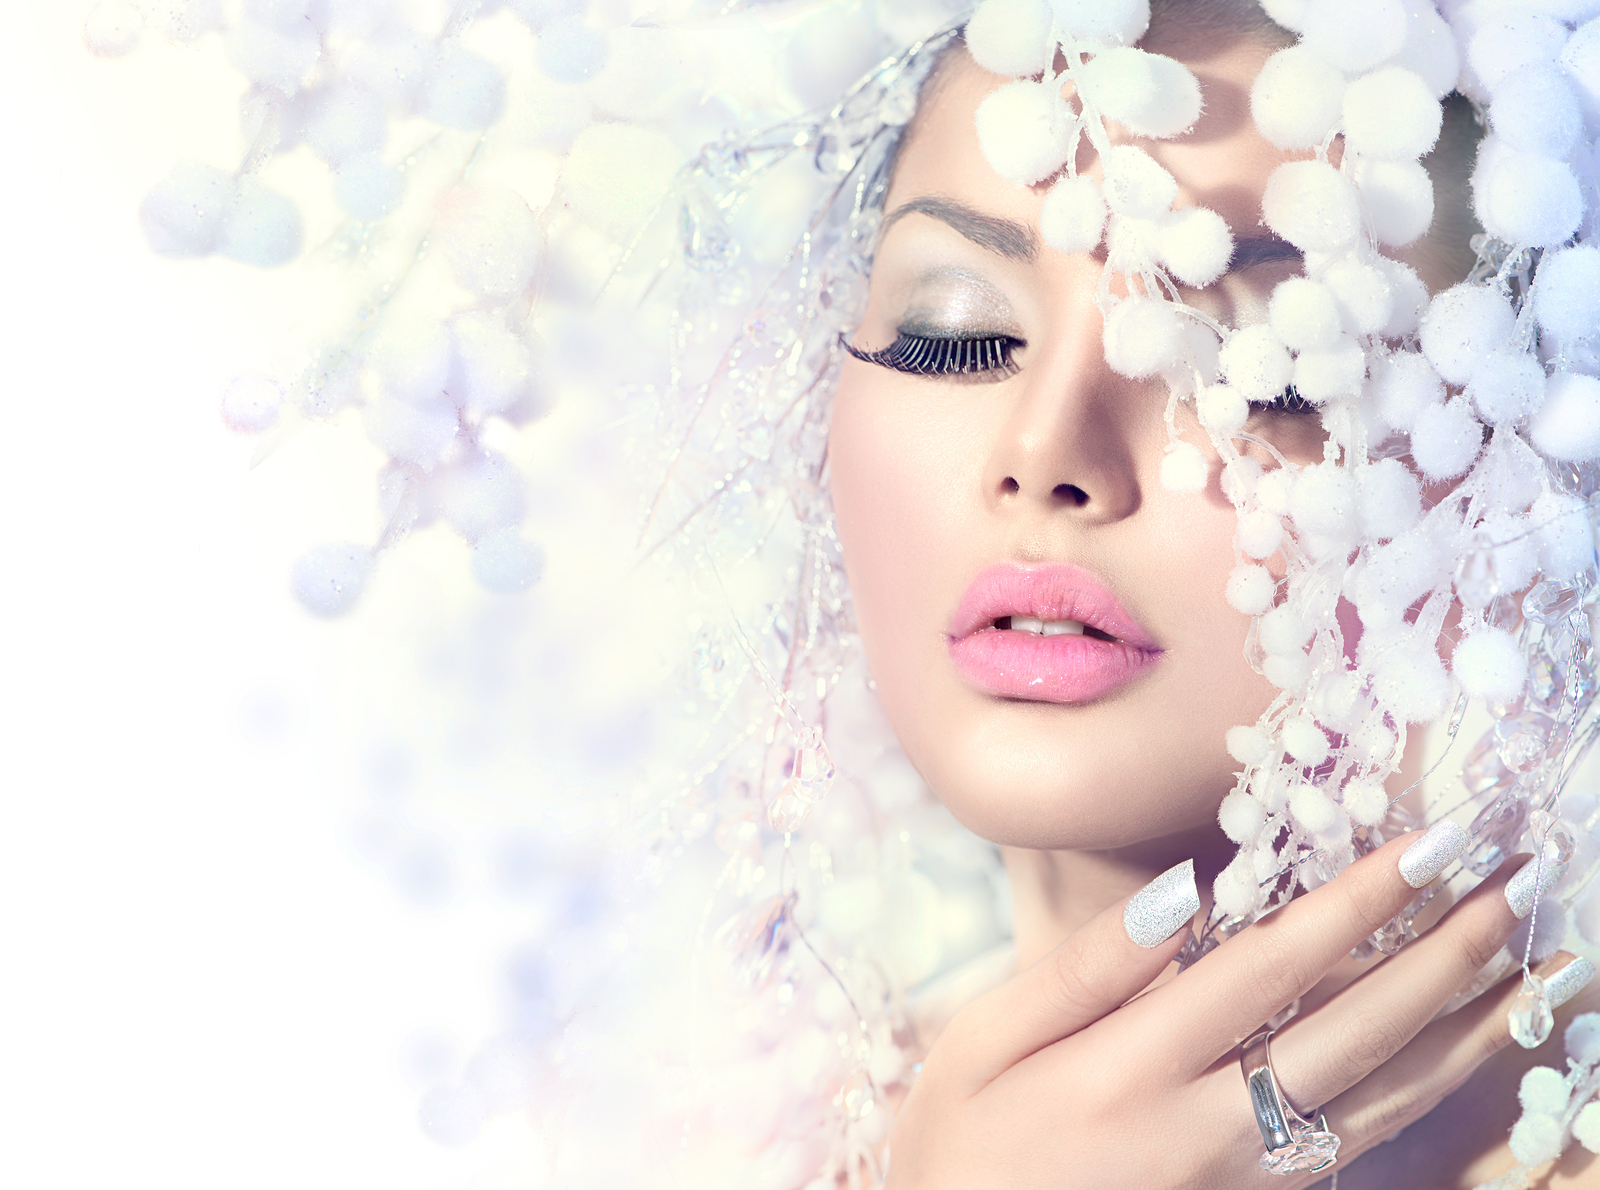 Wallpapers fashion make-up style on the desktop